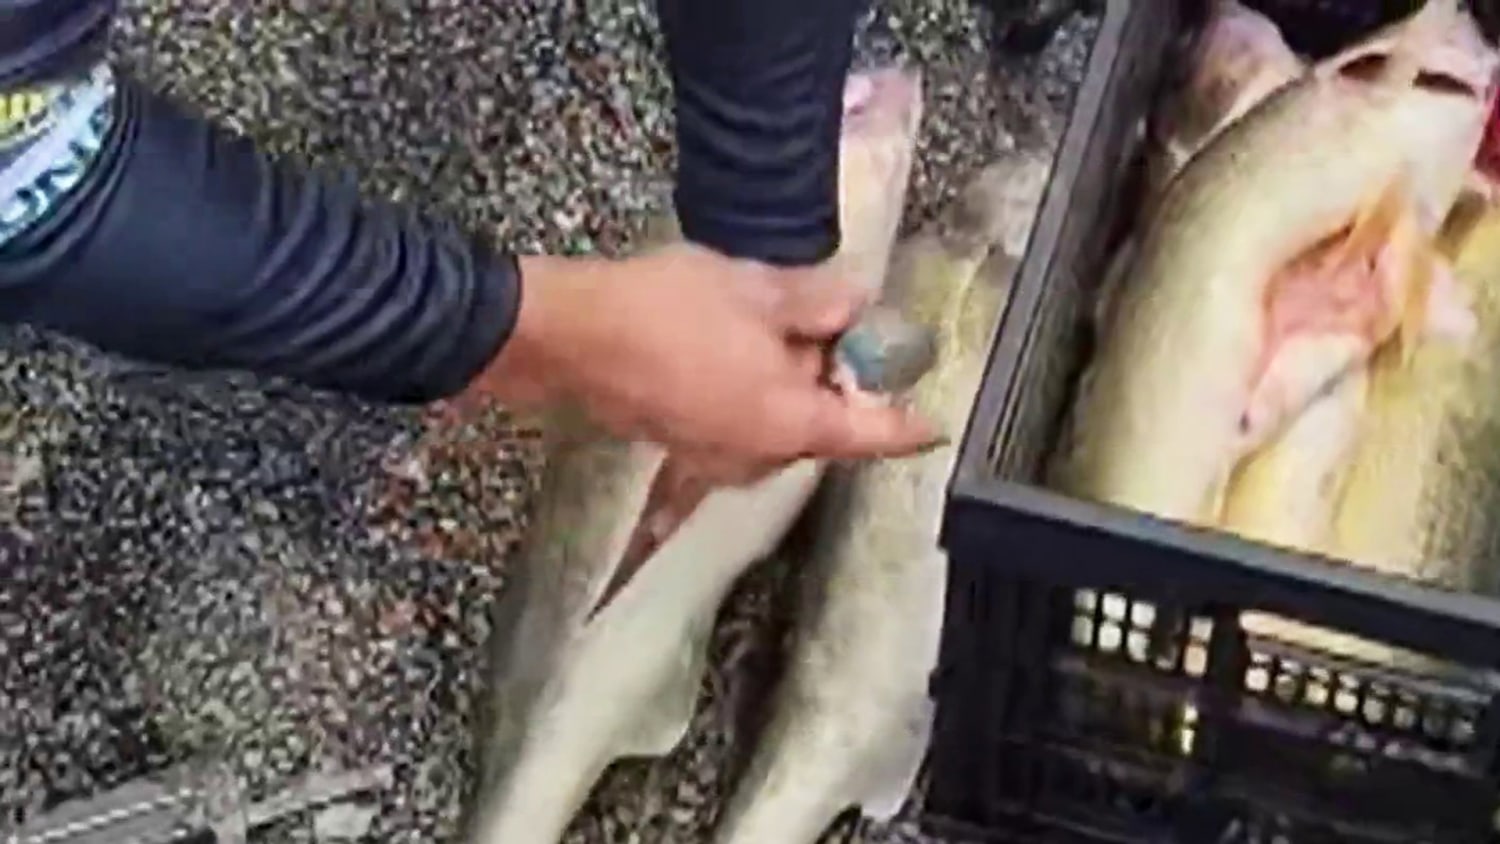 2 Men Accused of Stuffing Fish with Weights Plead Guilty To Cheating